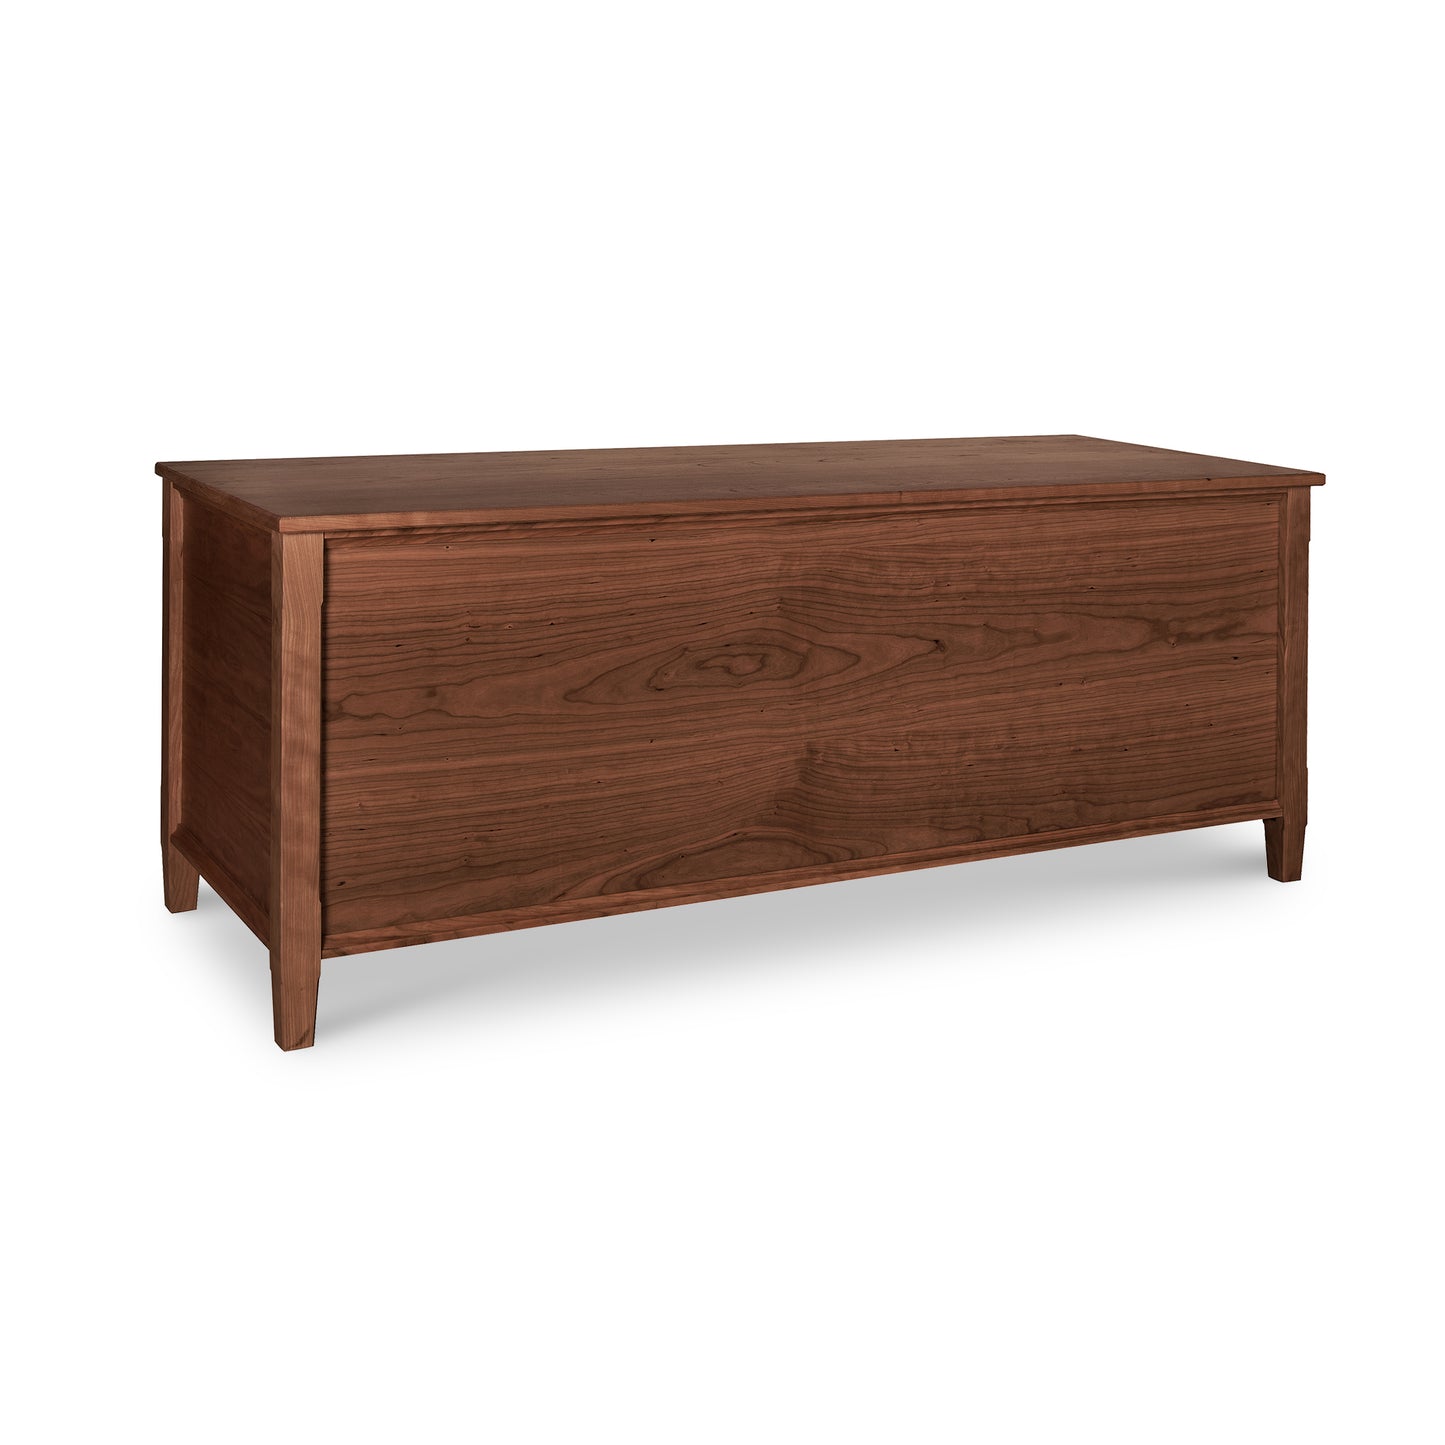 A Vermont Shaker Blanket Chest crafted from sustainably harvested woods, with a smooth, rectangular top and clean lines, finished in a warm brown tone. The blanket chest stands on four short, sturdy legs. Brand: Maple Corner Woodworks.